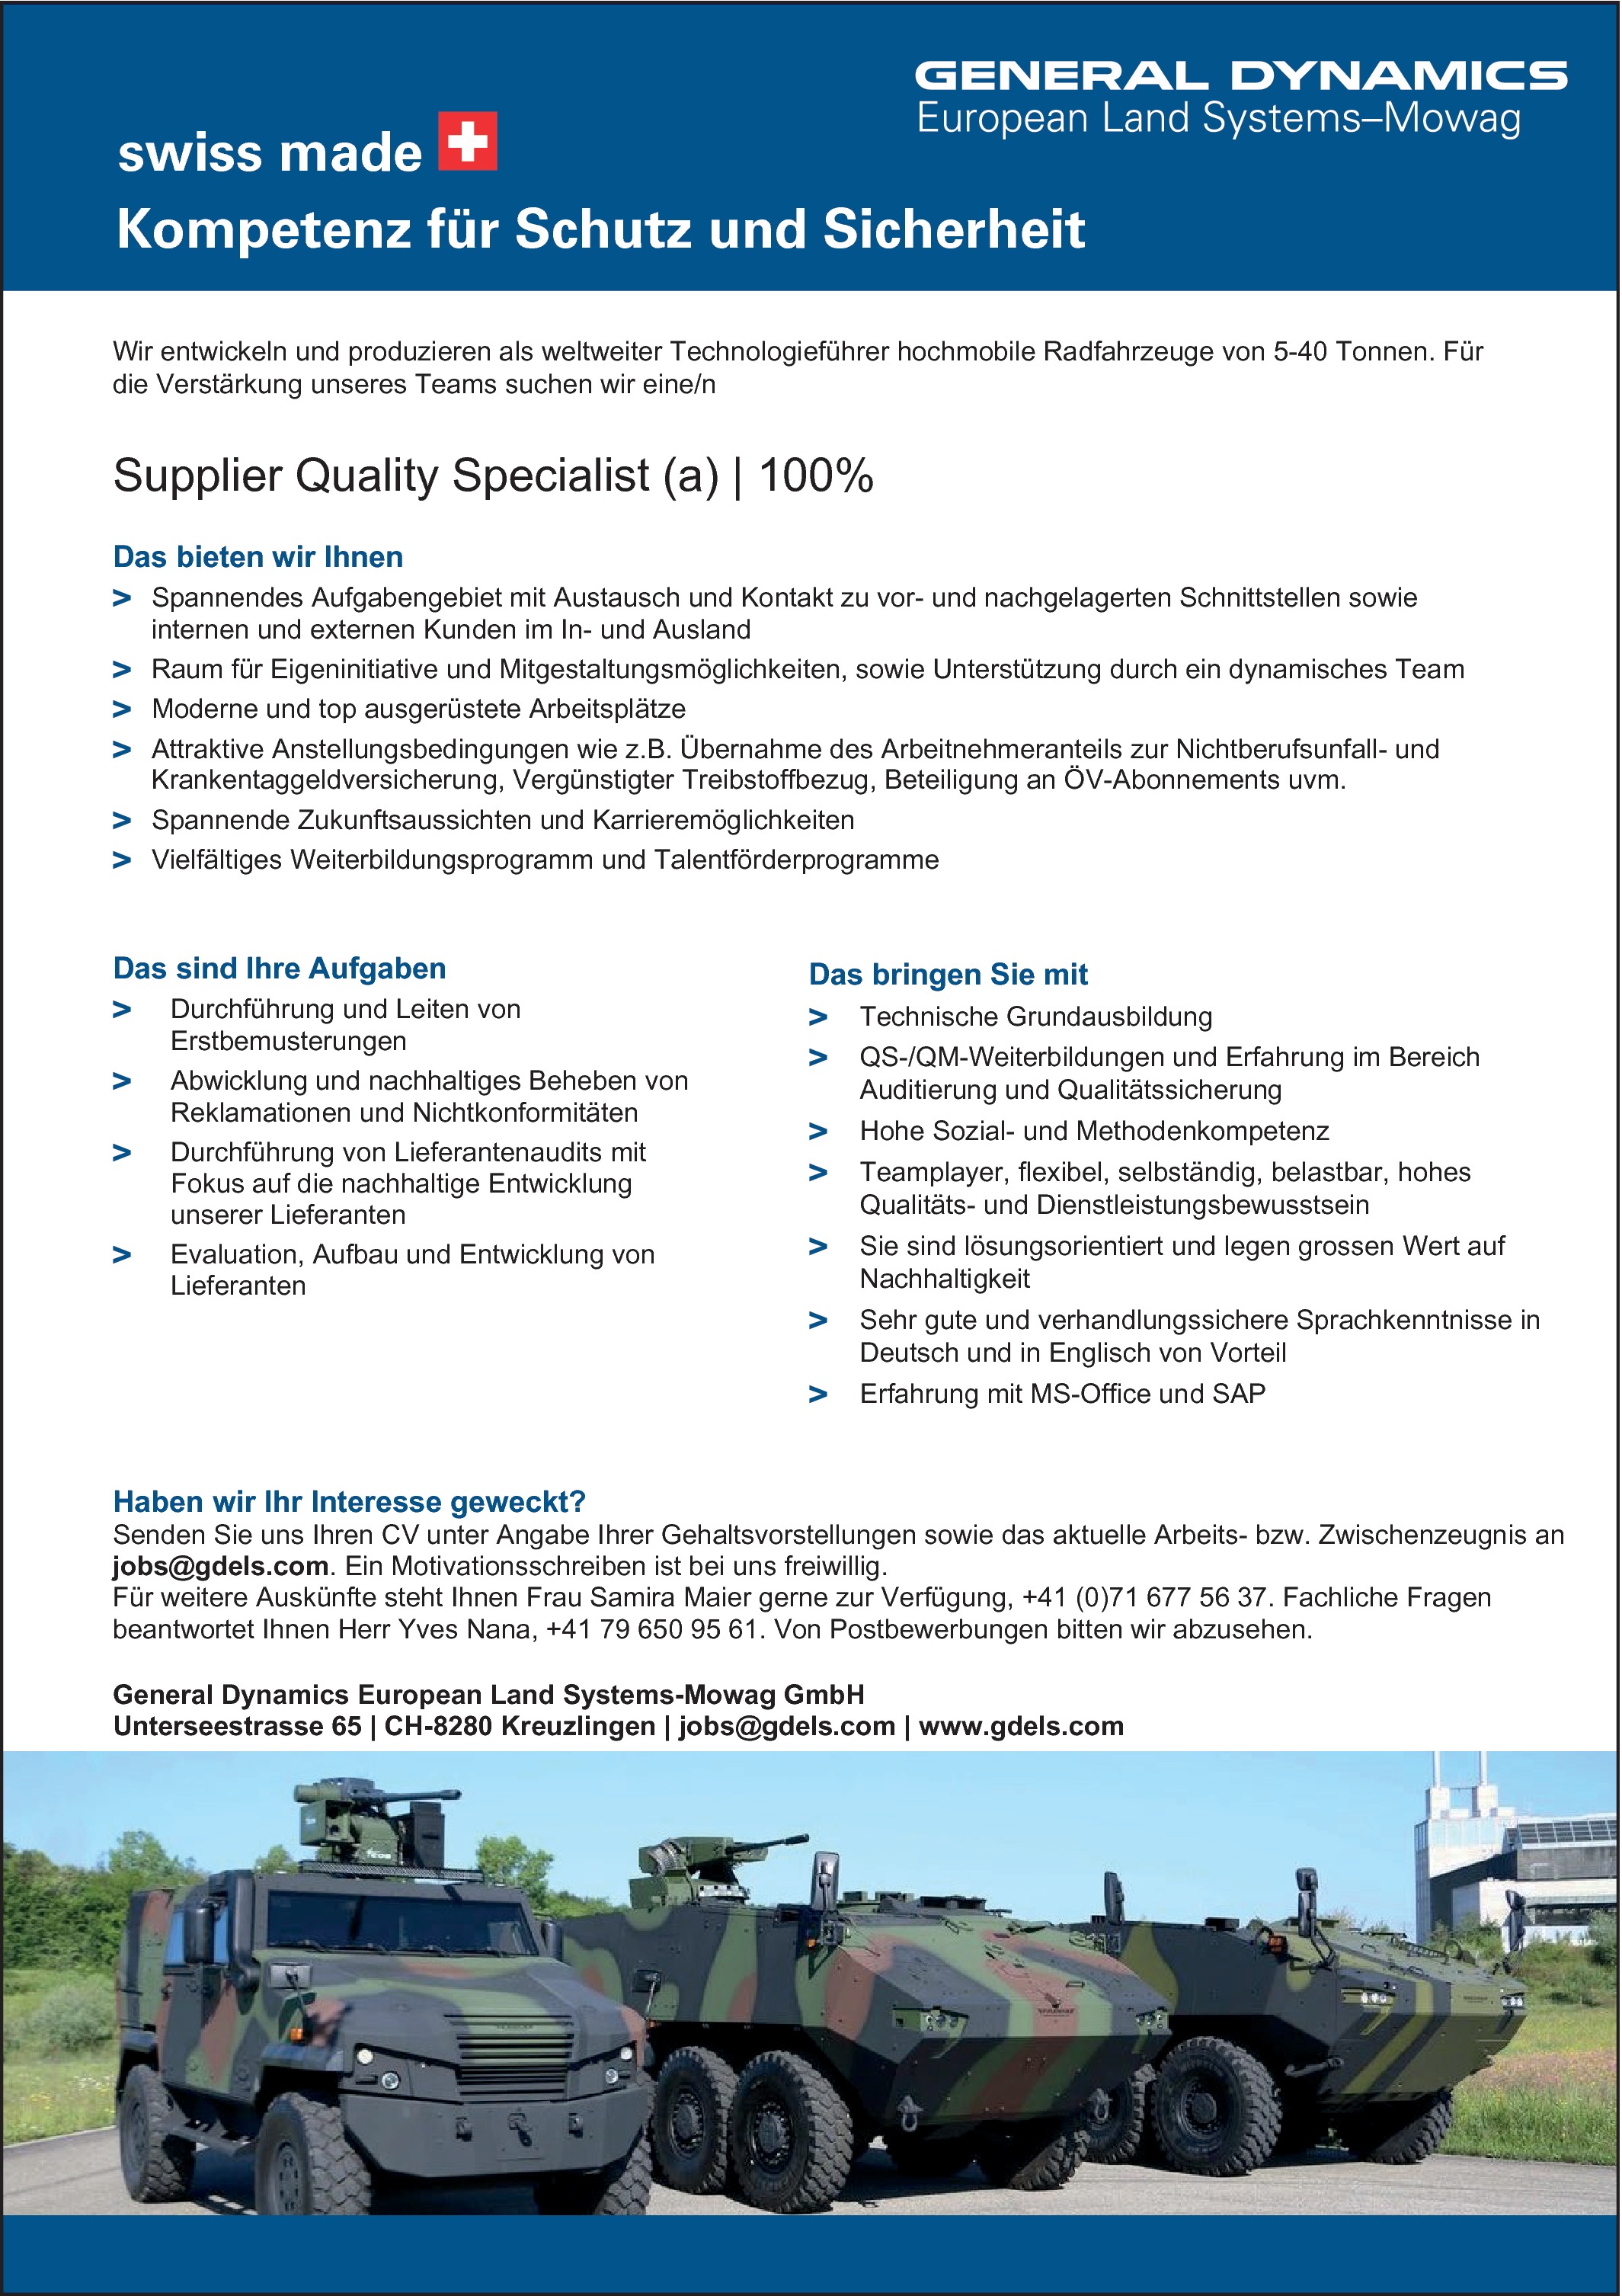 Supplier Quality Specialist (a)